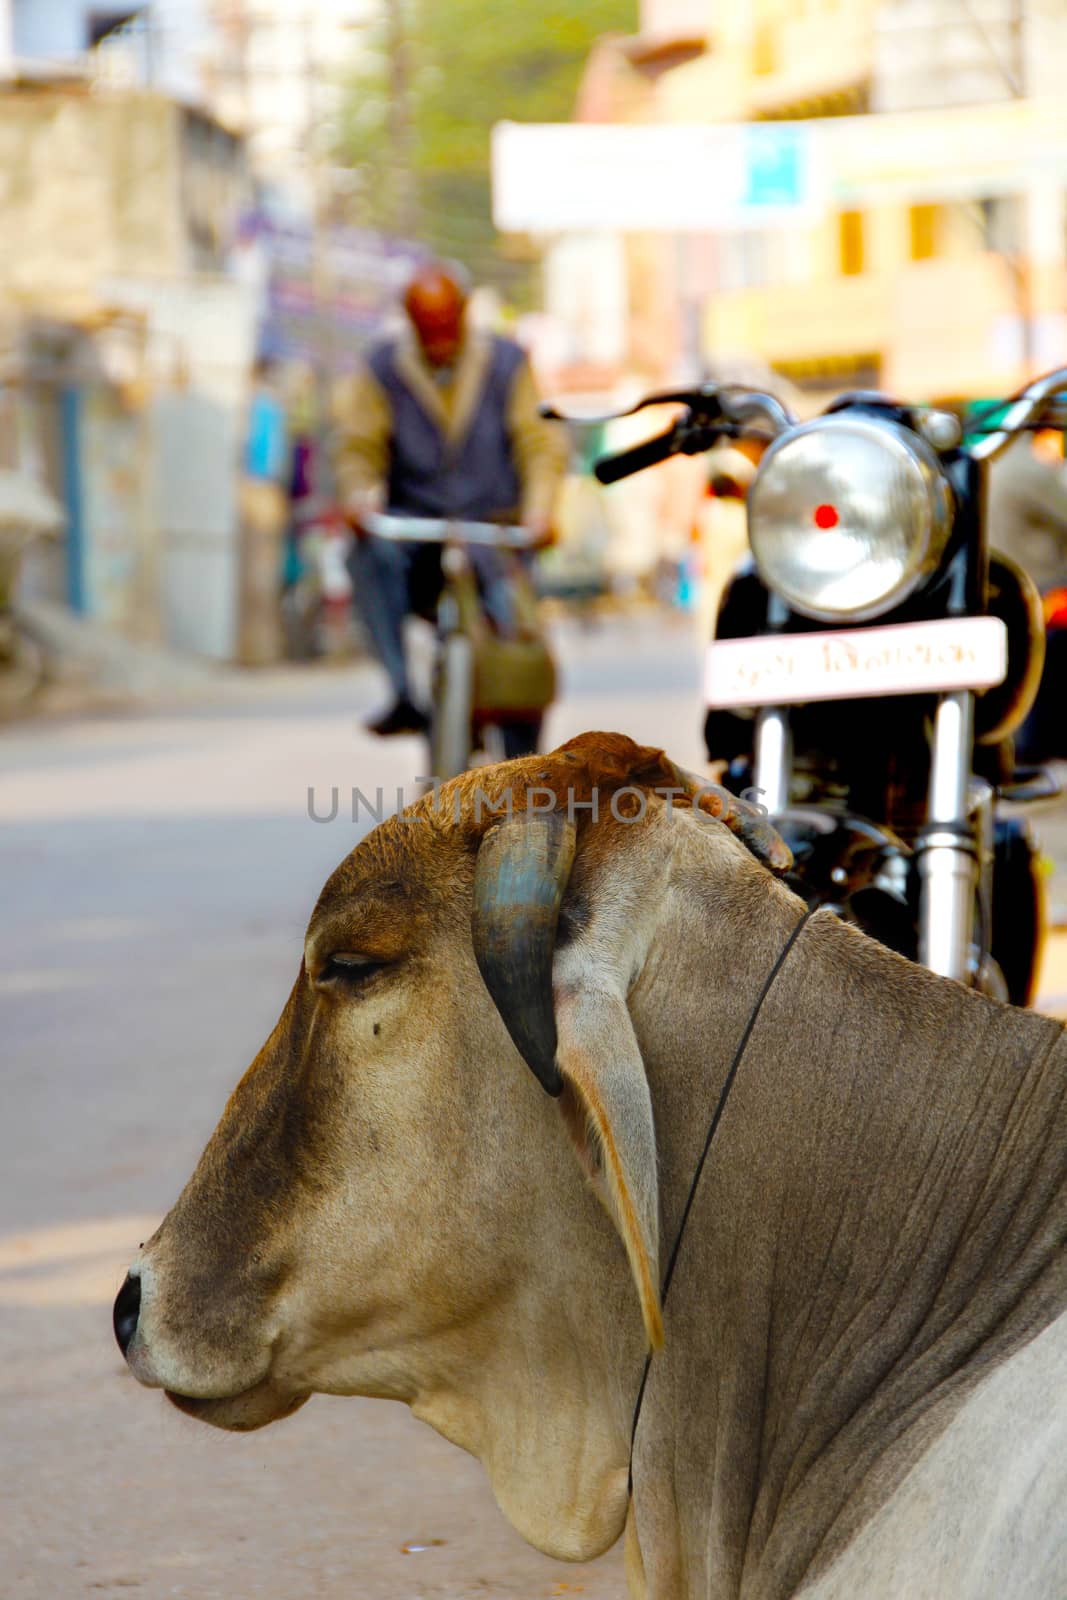 A cow resting on the street in Varanasi, India. The animals are sacred for the hindus and are common sight on the streets and road in India.